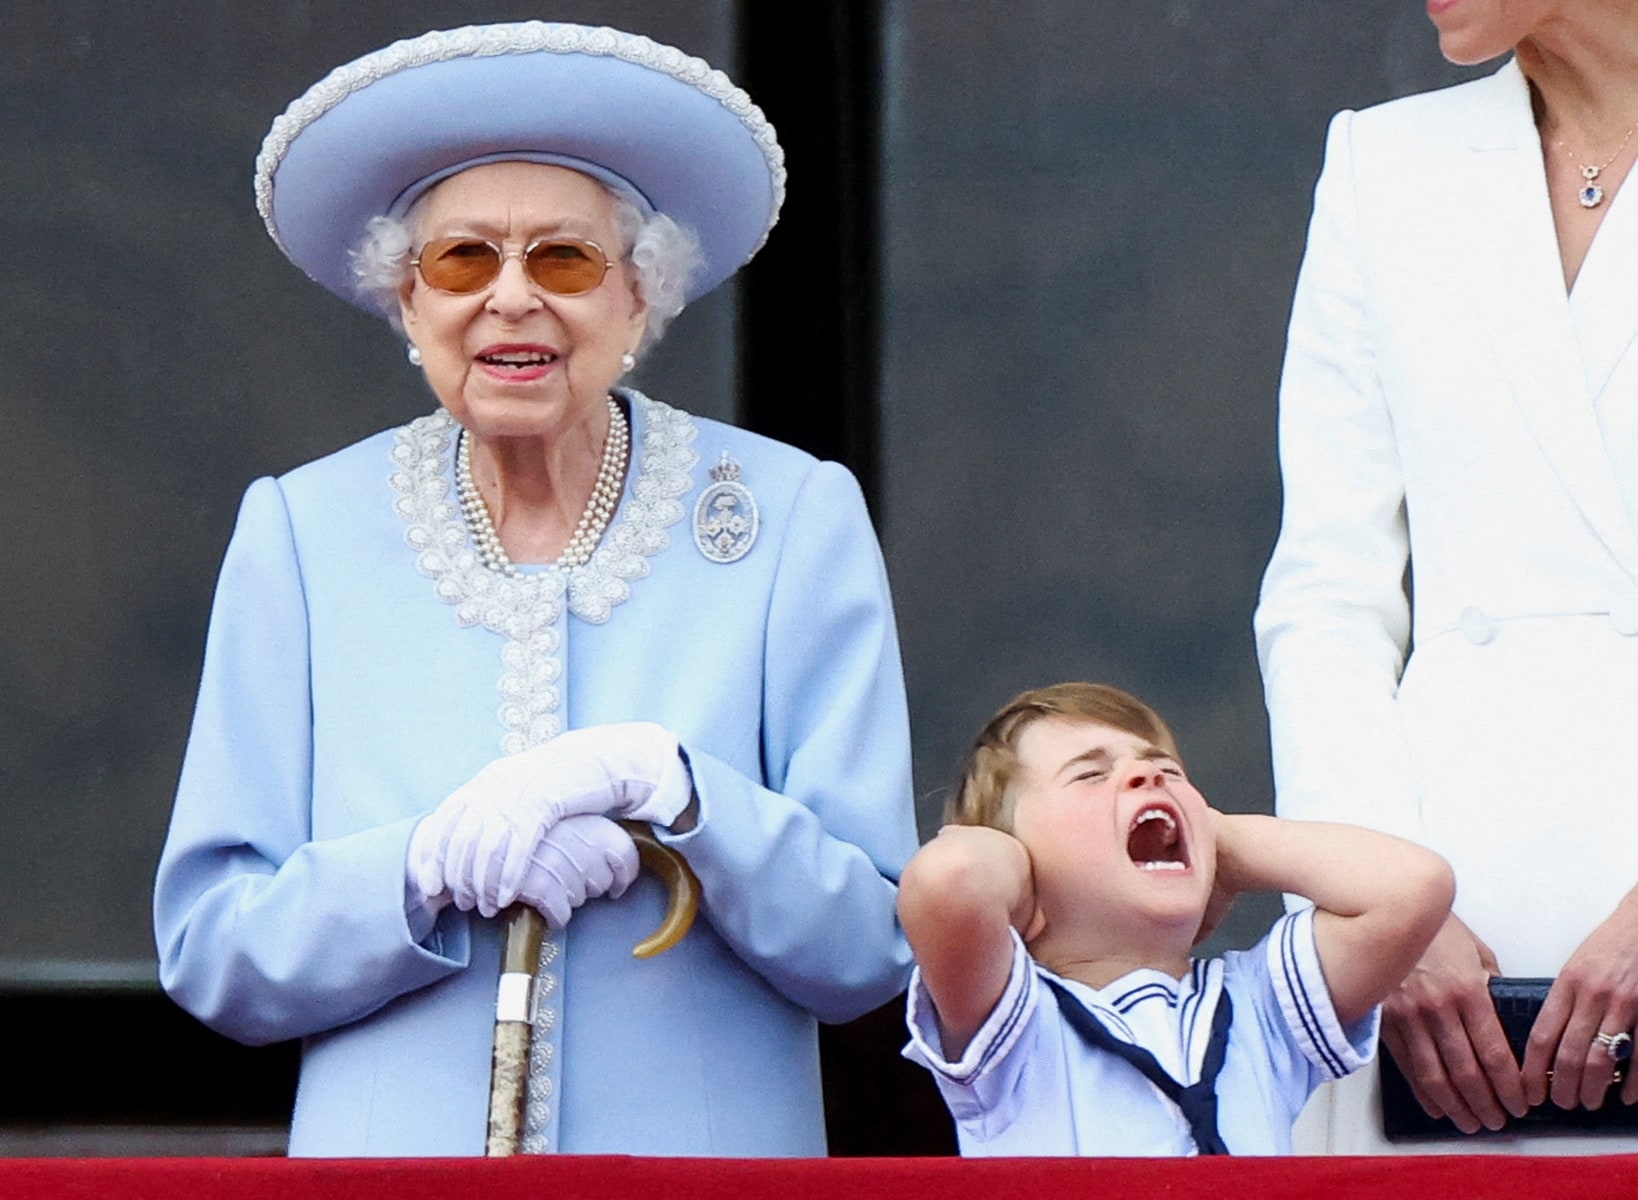 Britain's Queen Elizabeth and Prince Louis appear on the balcony of Buckingham Palace as part of Trooping the Colour parade during the Queen's Platinum Jubilee celebrations in London.(REUTERS)